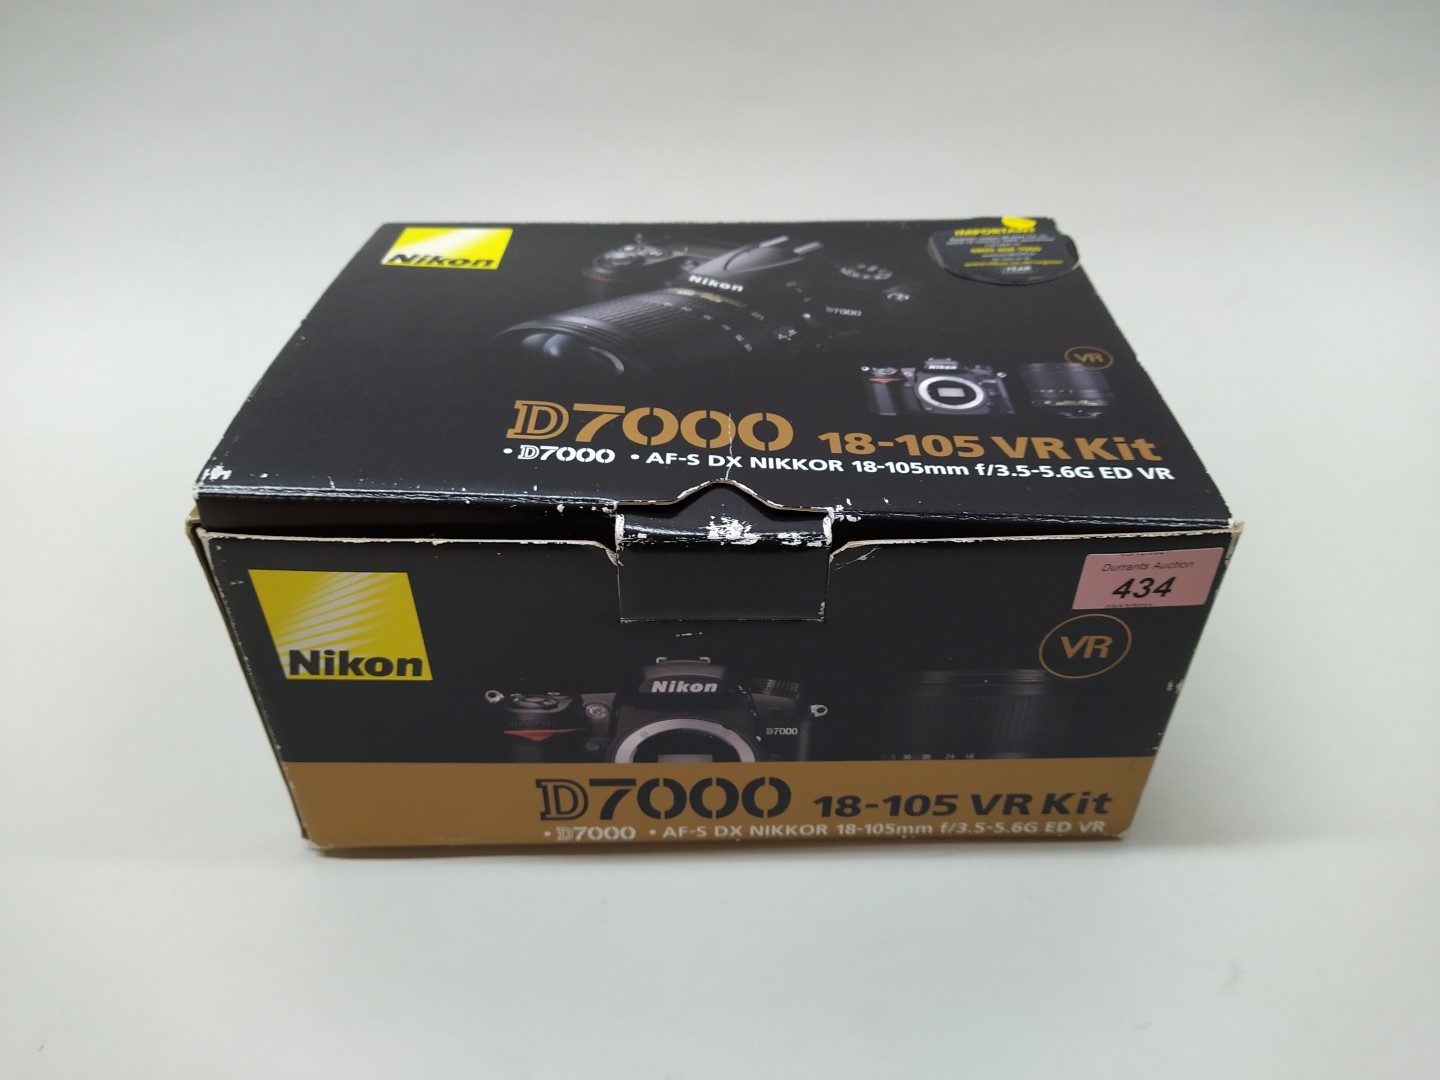 A Nikon D7000 camera body with a Nikon 18-77mm lens and charger in original box